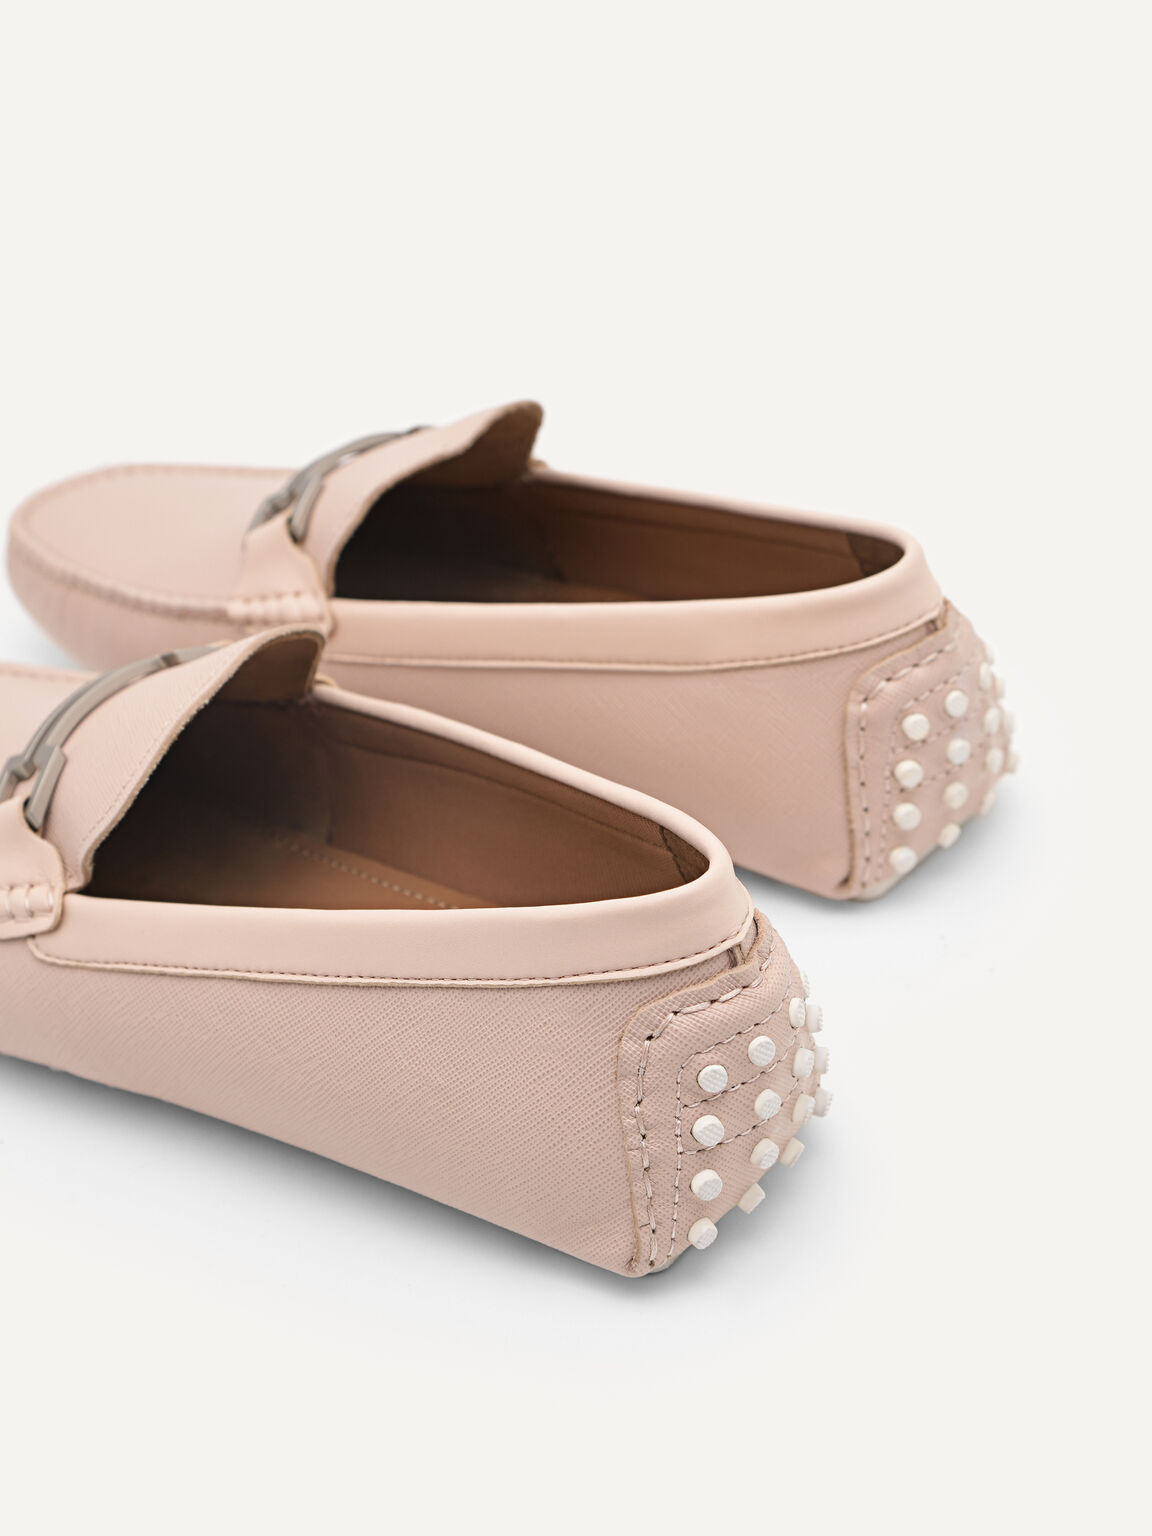 Embossed Bit Driving Shoes, Pink, hi-res